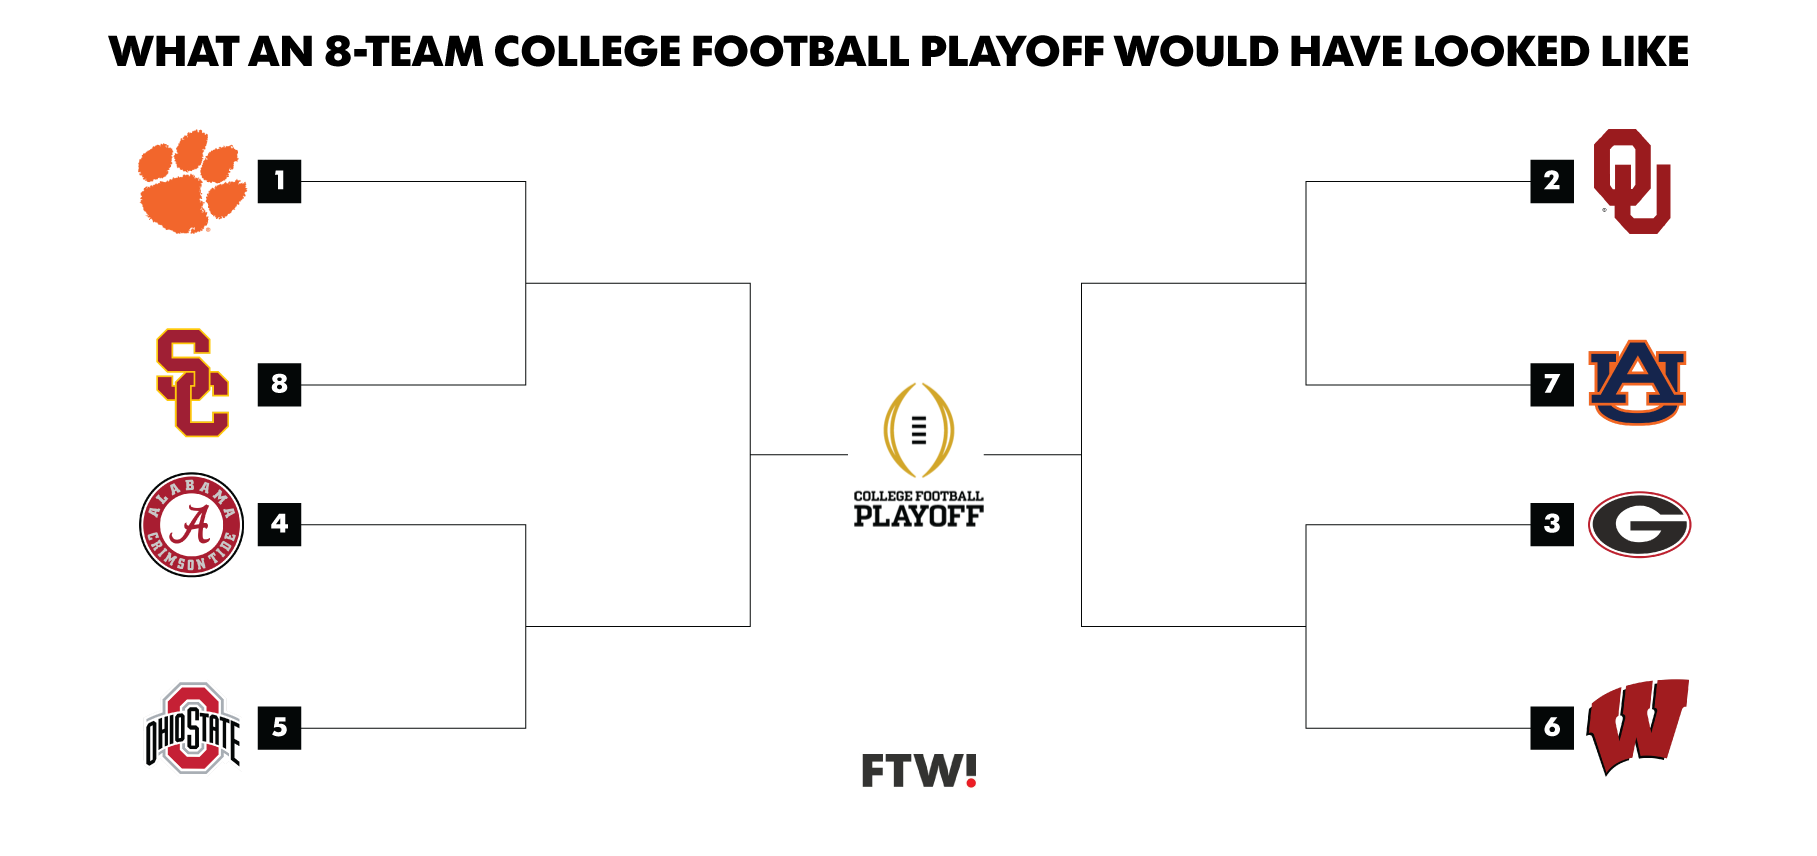 Here’s what an 8team College Football Playoff would’ve looked like